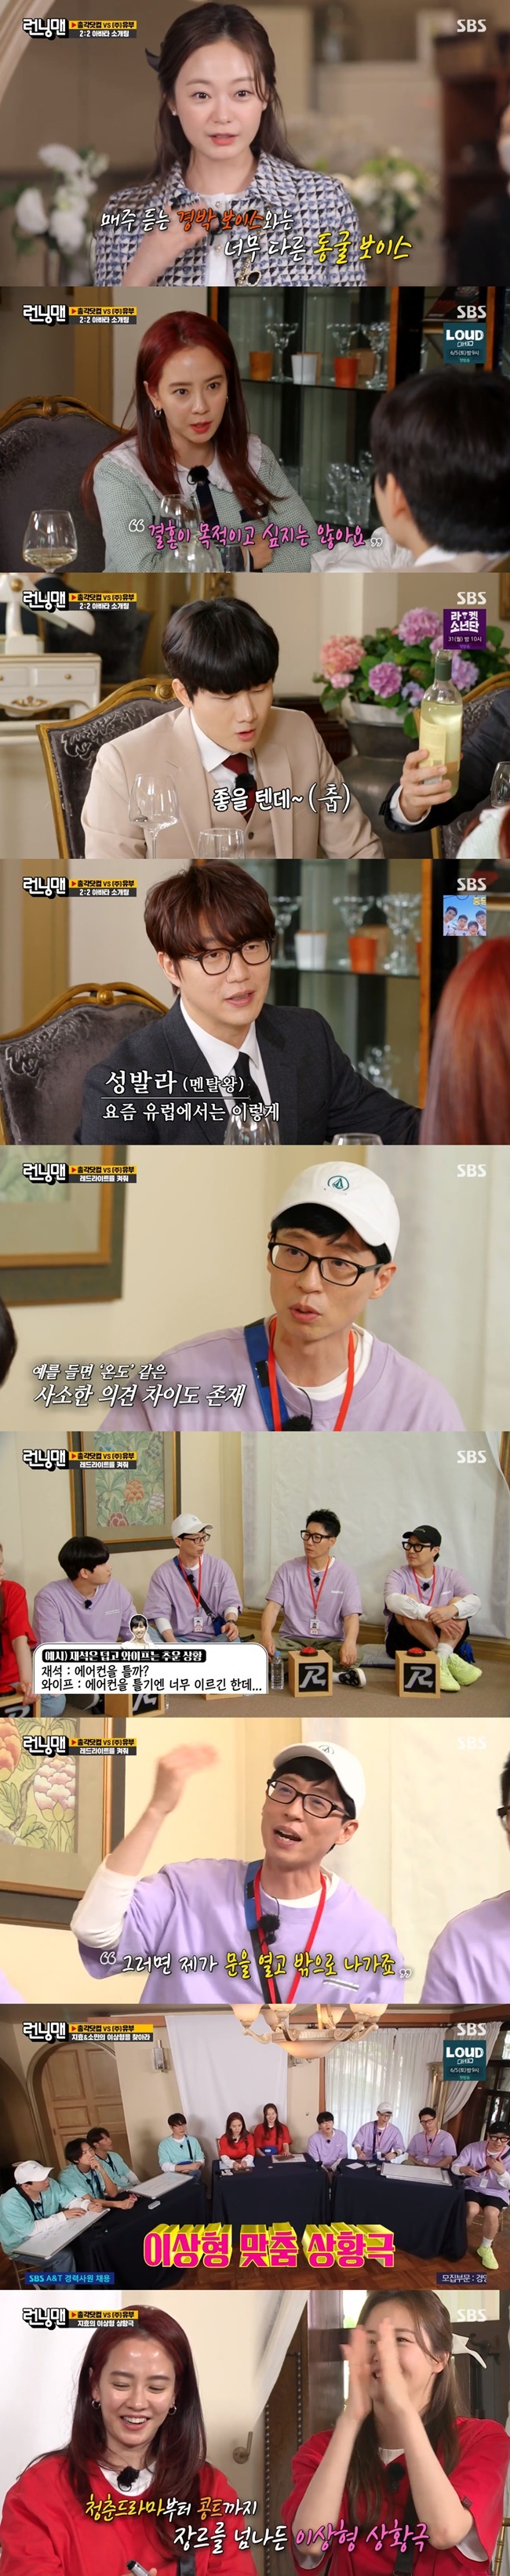 Yoo Jae-Suk reveals anecdote with Na Kyung-eun about a couple fight.On May 23, SBS Running Man was portrayed as members who turned into employees of marriage information company.The male members were divided into single (Bachelor.com) and married (Abura-age), respectively.Lee Yong-jin, especially in the married team, and Sung Si-kyung, in the unmarried team, became the representative.Sung Si-kyung expressed confidence that he had spent 5,000 pairs last month, but Yoo Jae-Suk refuted, Why didnt you go?Lee Yong-jin said, The market capitalization is 500 million more than bachelor.com, but he did not know the meaning of market capitalization.Representatives of each team can change the position sticker to the members.Female members Song Ji-hyo and Jeon So-min appear as The Client, and the team that Choices received becomes the main character of the gold three money.Prior to the full-scale race, each team representative and two of The Client conducted a 2:2 avatar blind date.Im so nervous, Jeon So-min said to the honey-dropping Sung Si-kyung voice.In particular, Jeon So-min confessed his fanship about Sung Si-kyung and sang a song.Sung Si-kyung, who saw this, was surprised that he was not receiving instructions. Song Ji-hyo, the first blind date of his life, said, Marriage is not the purpose.I hope I meet someone who knows Im sorry, said Song Ji-hyo and Jeon So-mins Choices, a bachelor.com.In the full-scale mission, Give me the Red Light was held. The selection of 833 love cases received from viewers will be decided whether to make a red light.The Client, who heard the members love affair, gives a star to a team that moves the mind.Yoo Jae-Suk, who listened to the story of the story, said, I also fight a couple.For example, I want to turn on the air conditioner, but I do not have a wife. In the end, I open the door and go out and wind.When that happened, the owner of this house was Na Kyung-eun. Yoo Jae-Suks performance took the victory.The second mission is to win the best difficulty balance game by putting conditions on the ideal type of The Clients.Yang Se-chan and Lee Je-hoon appeared in the ideal World Cup of Jeon So-min.The Abura-age team set Yang Se-chan as the chief judge and Lee Je-hoon as the white water to balance.Yang Se-chan, who saw this, expressed his sadness that he was going to Baeksu. In this round, both teams were drawn.